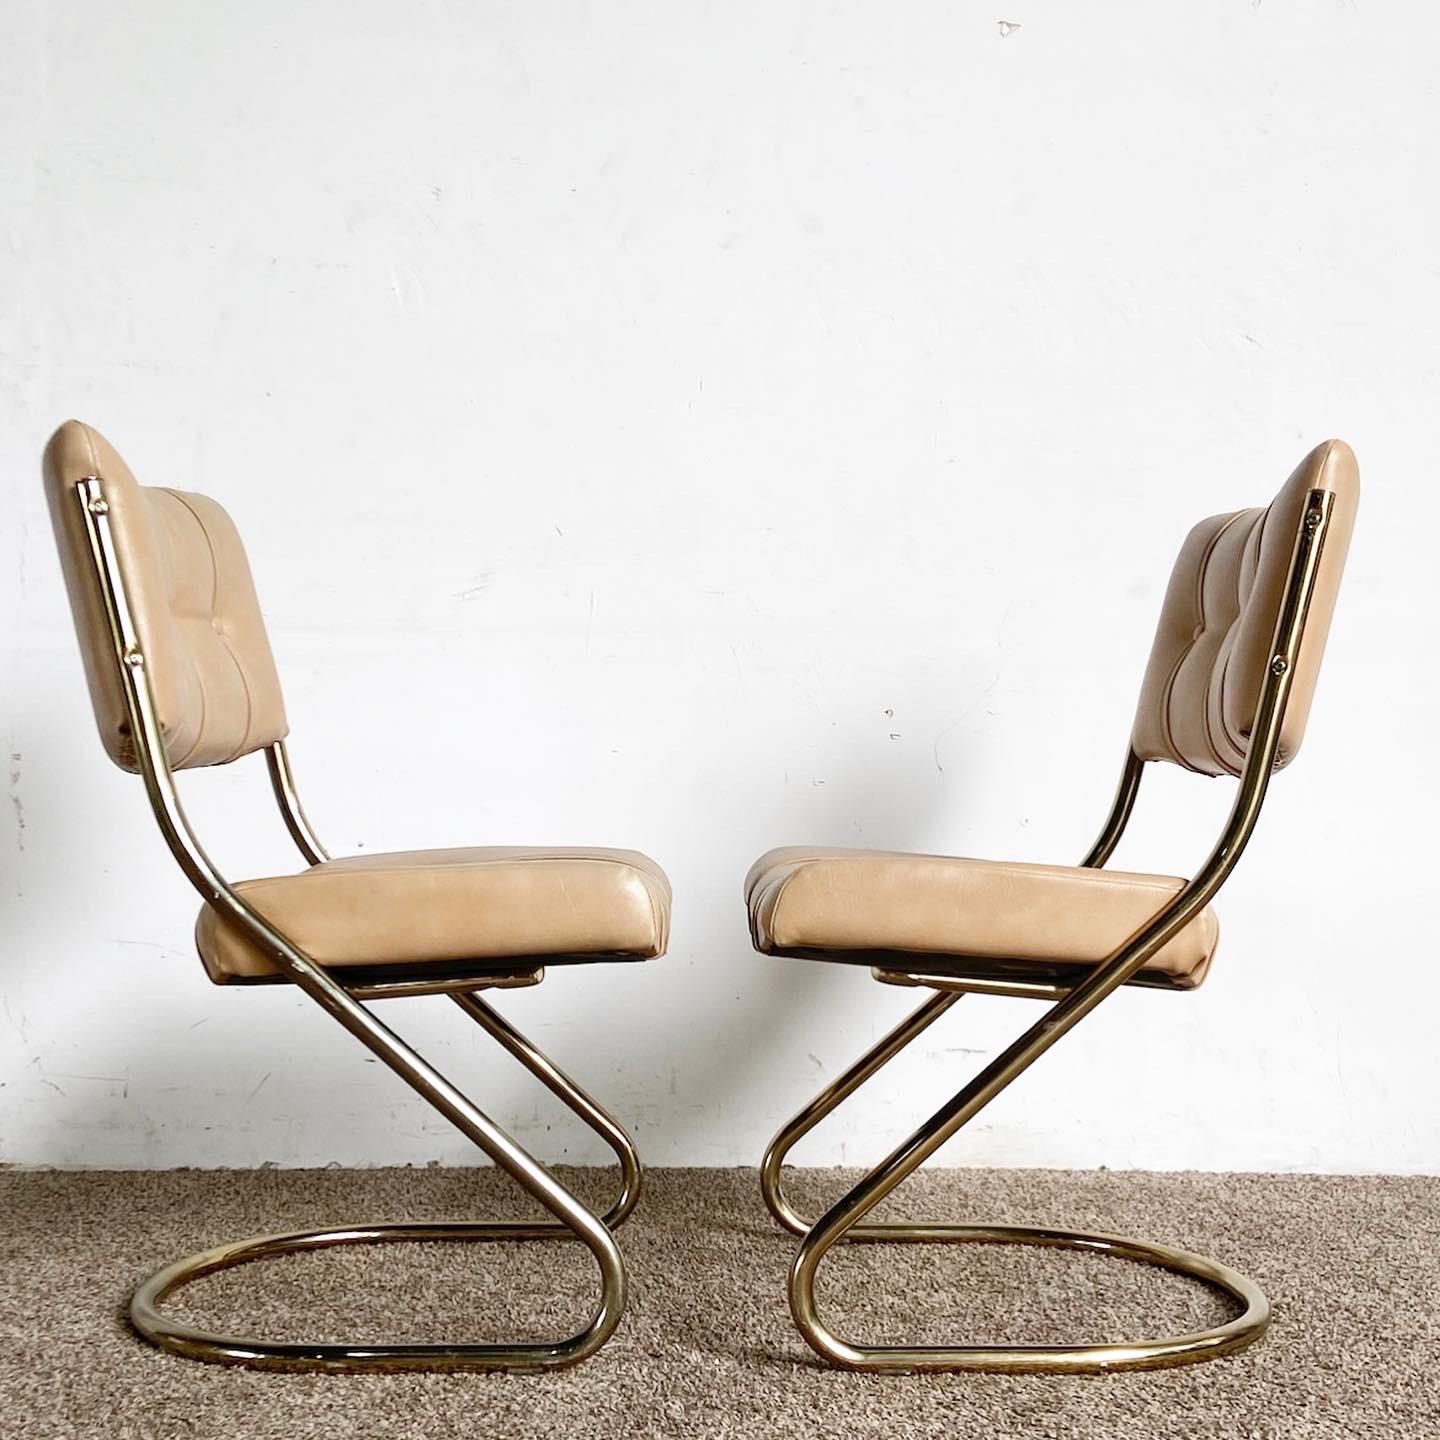 American Mid Century Modern Gold and Tan Tufted Cantilever Chairs by Chromcraft - a Pair For Sale